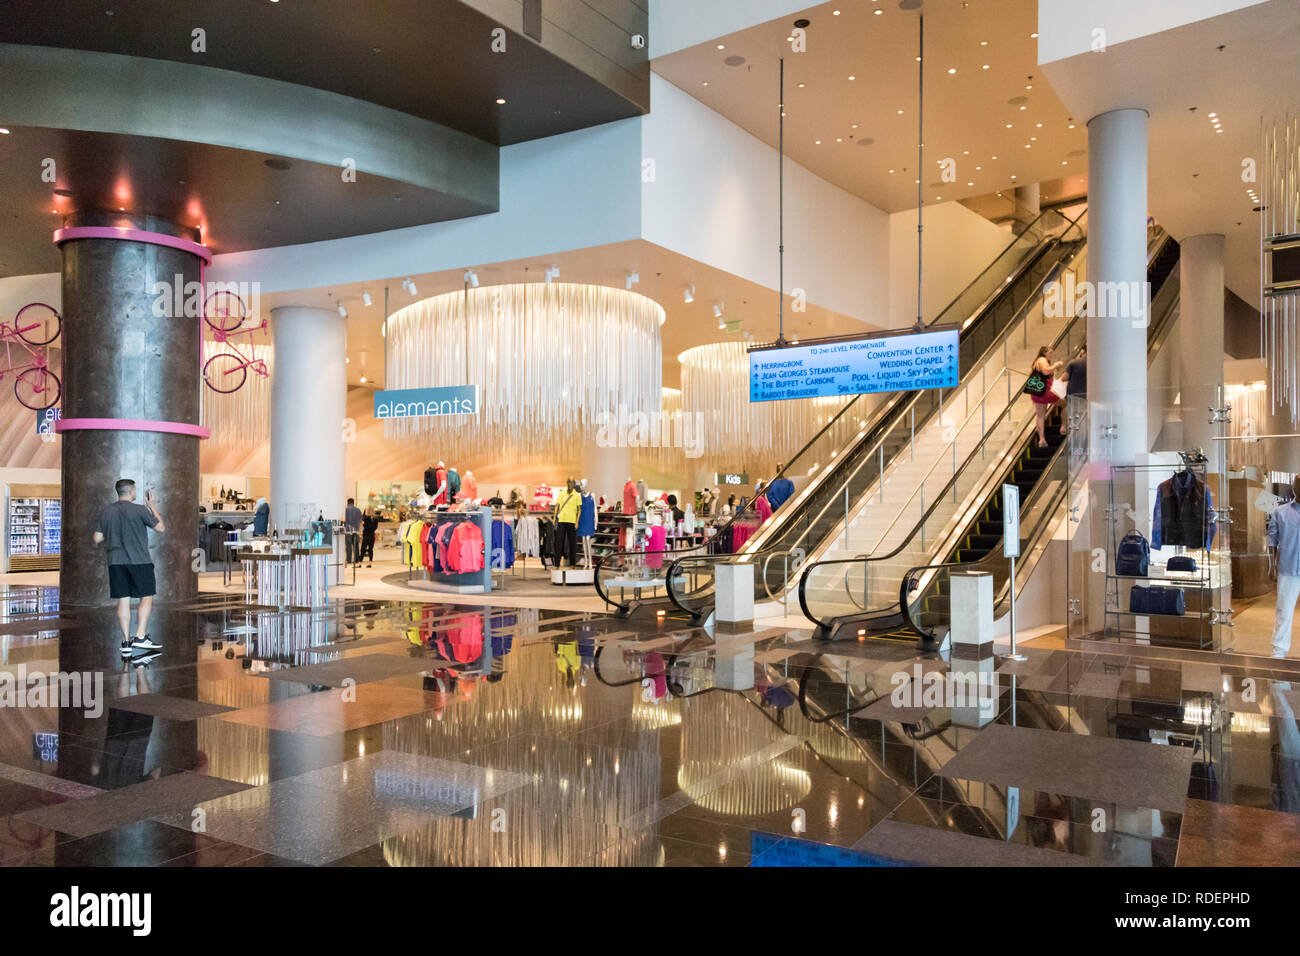 Las Vegas, Nevada September 1, 2017: Aria Hotel & Resort The Shops at  Crystals interior mall area with escalator and clothing Stock Photo - Alamy